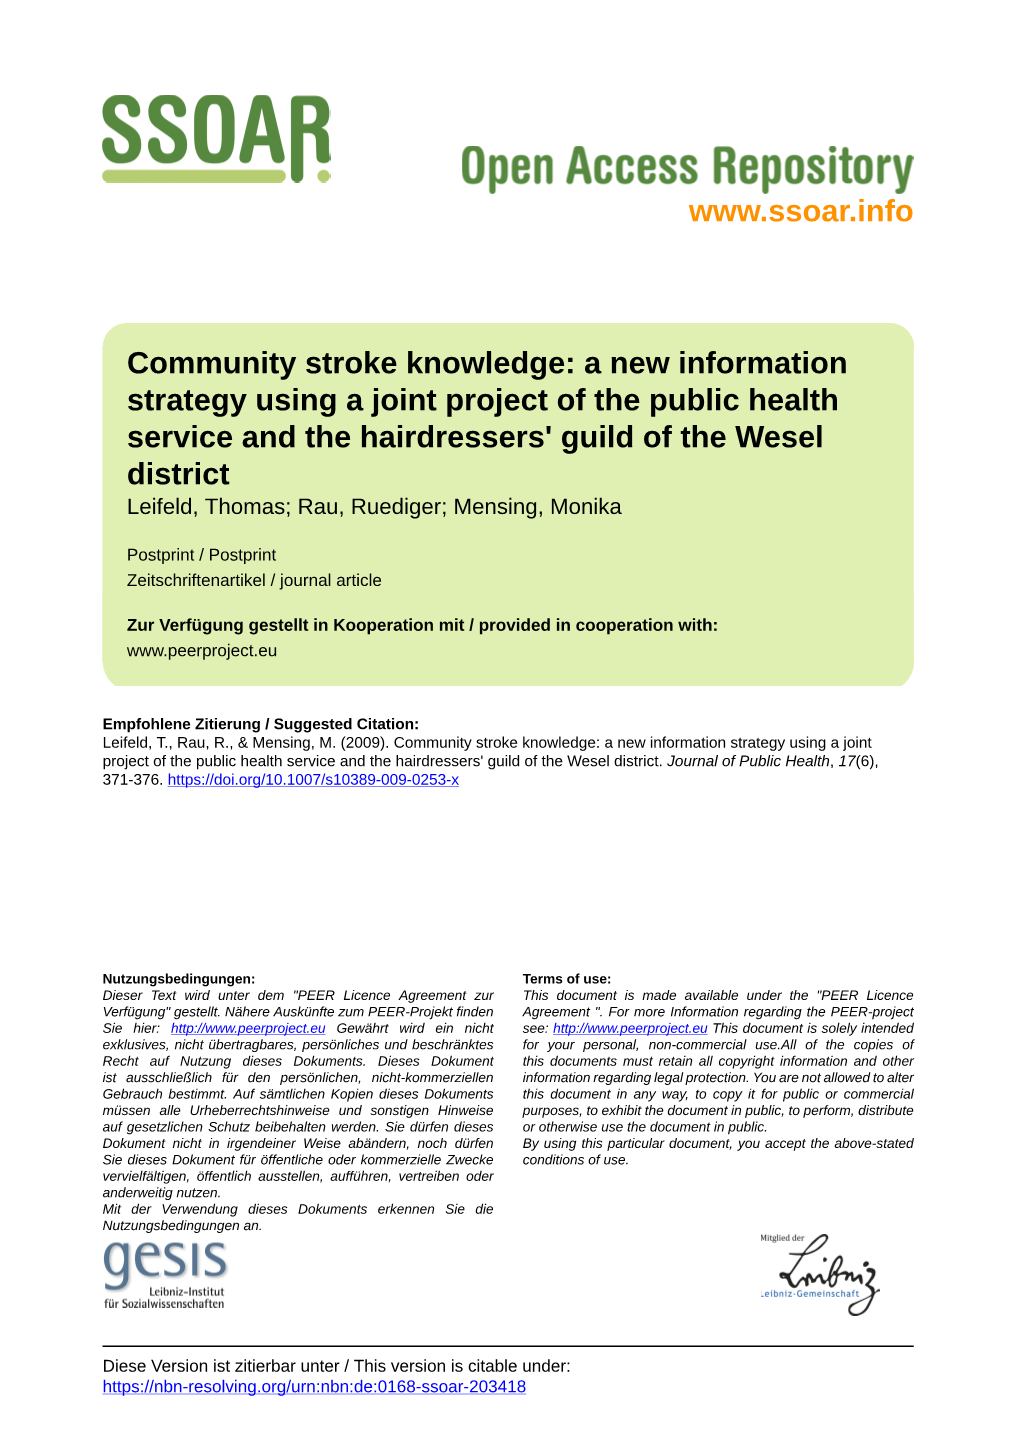 Community Stroke Knowledge: a New Information Strategy Using a Joint